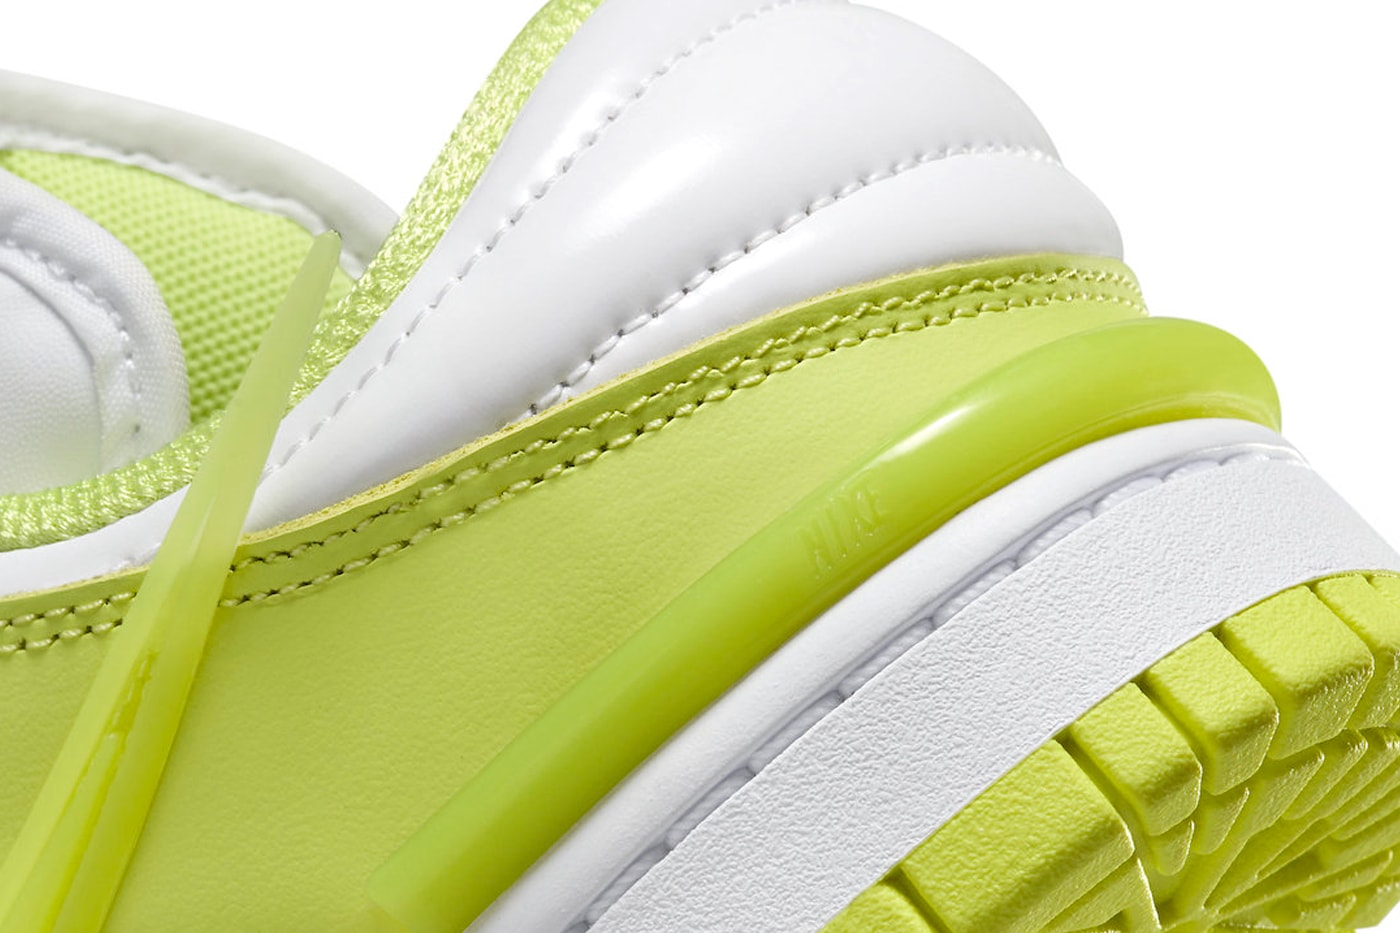 Official Images of the Nike Dunk Low Twist "Lemon Twist" DZ2794-700 holiday 2023 Light Lemon Twist/Light Lemon Twist-White release info sneakers swoosh shoes